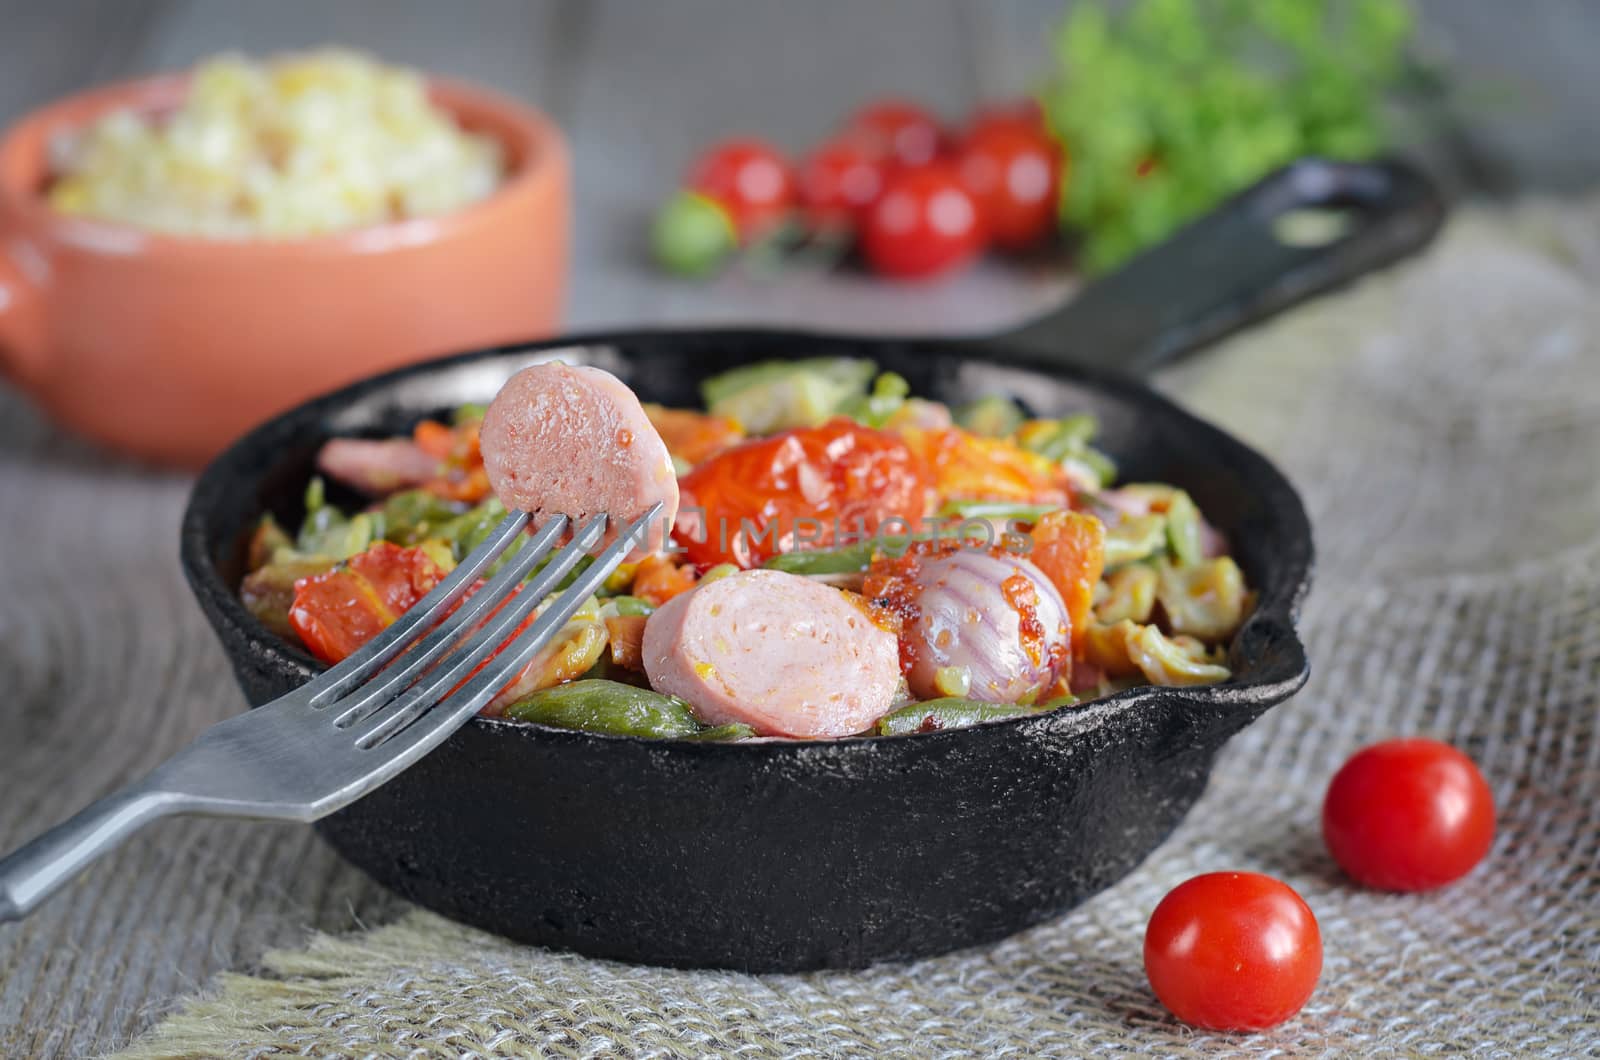 Vegetables with chopped sausages, fried in a pan. The rice and greens by Gaina